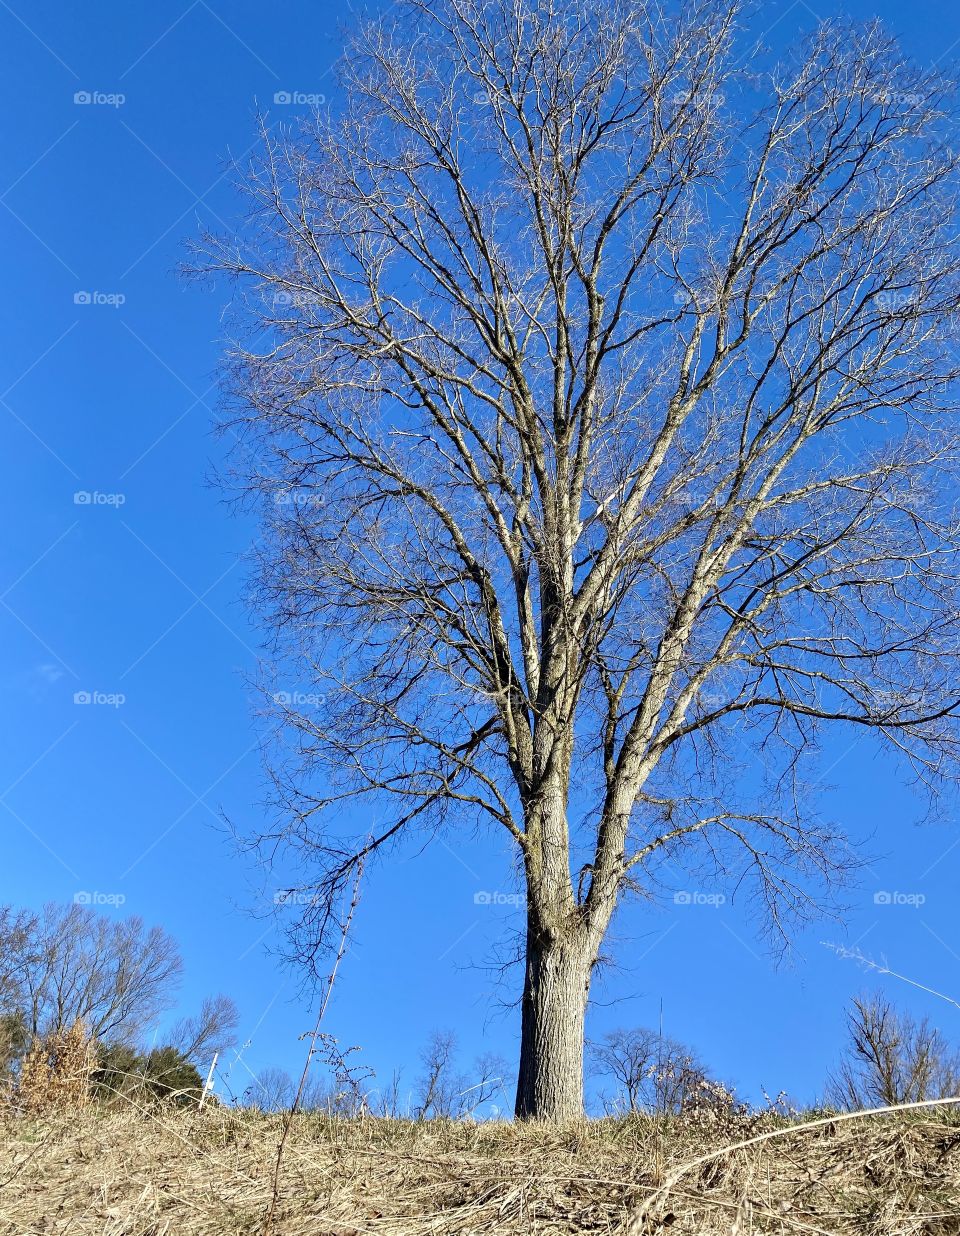 No leaves, just branches and blue sky